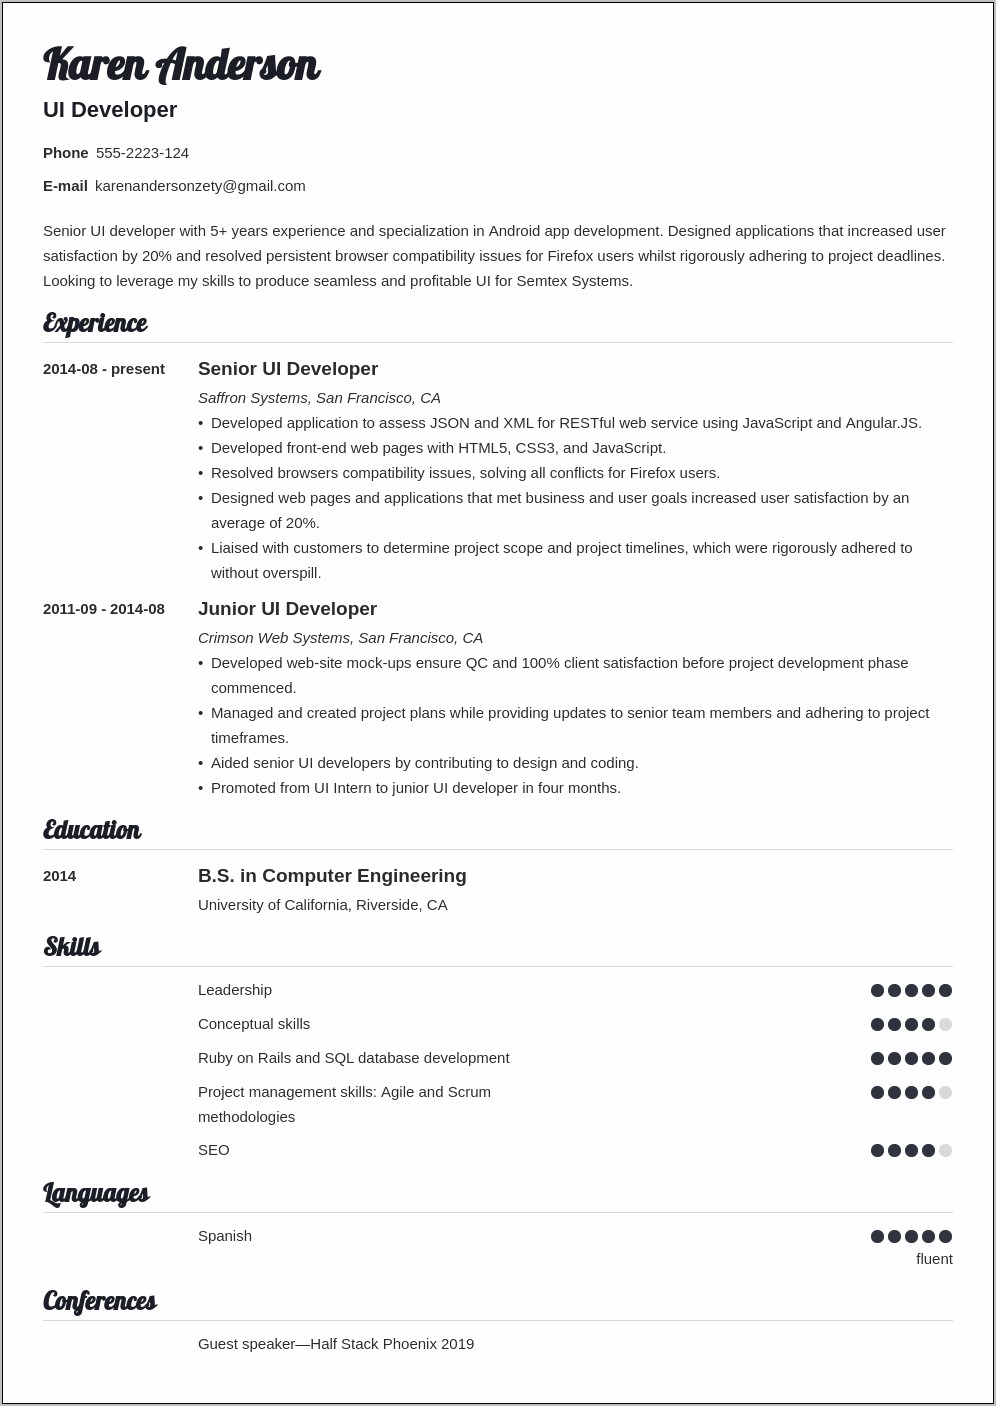 2 Years Experience Resume Format For Ui Developer